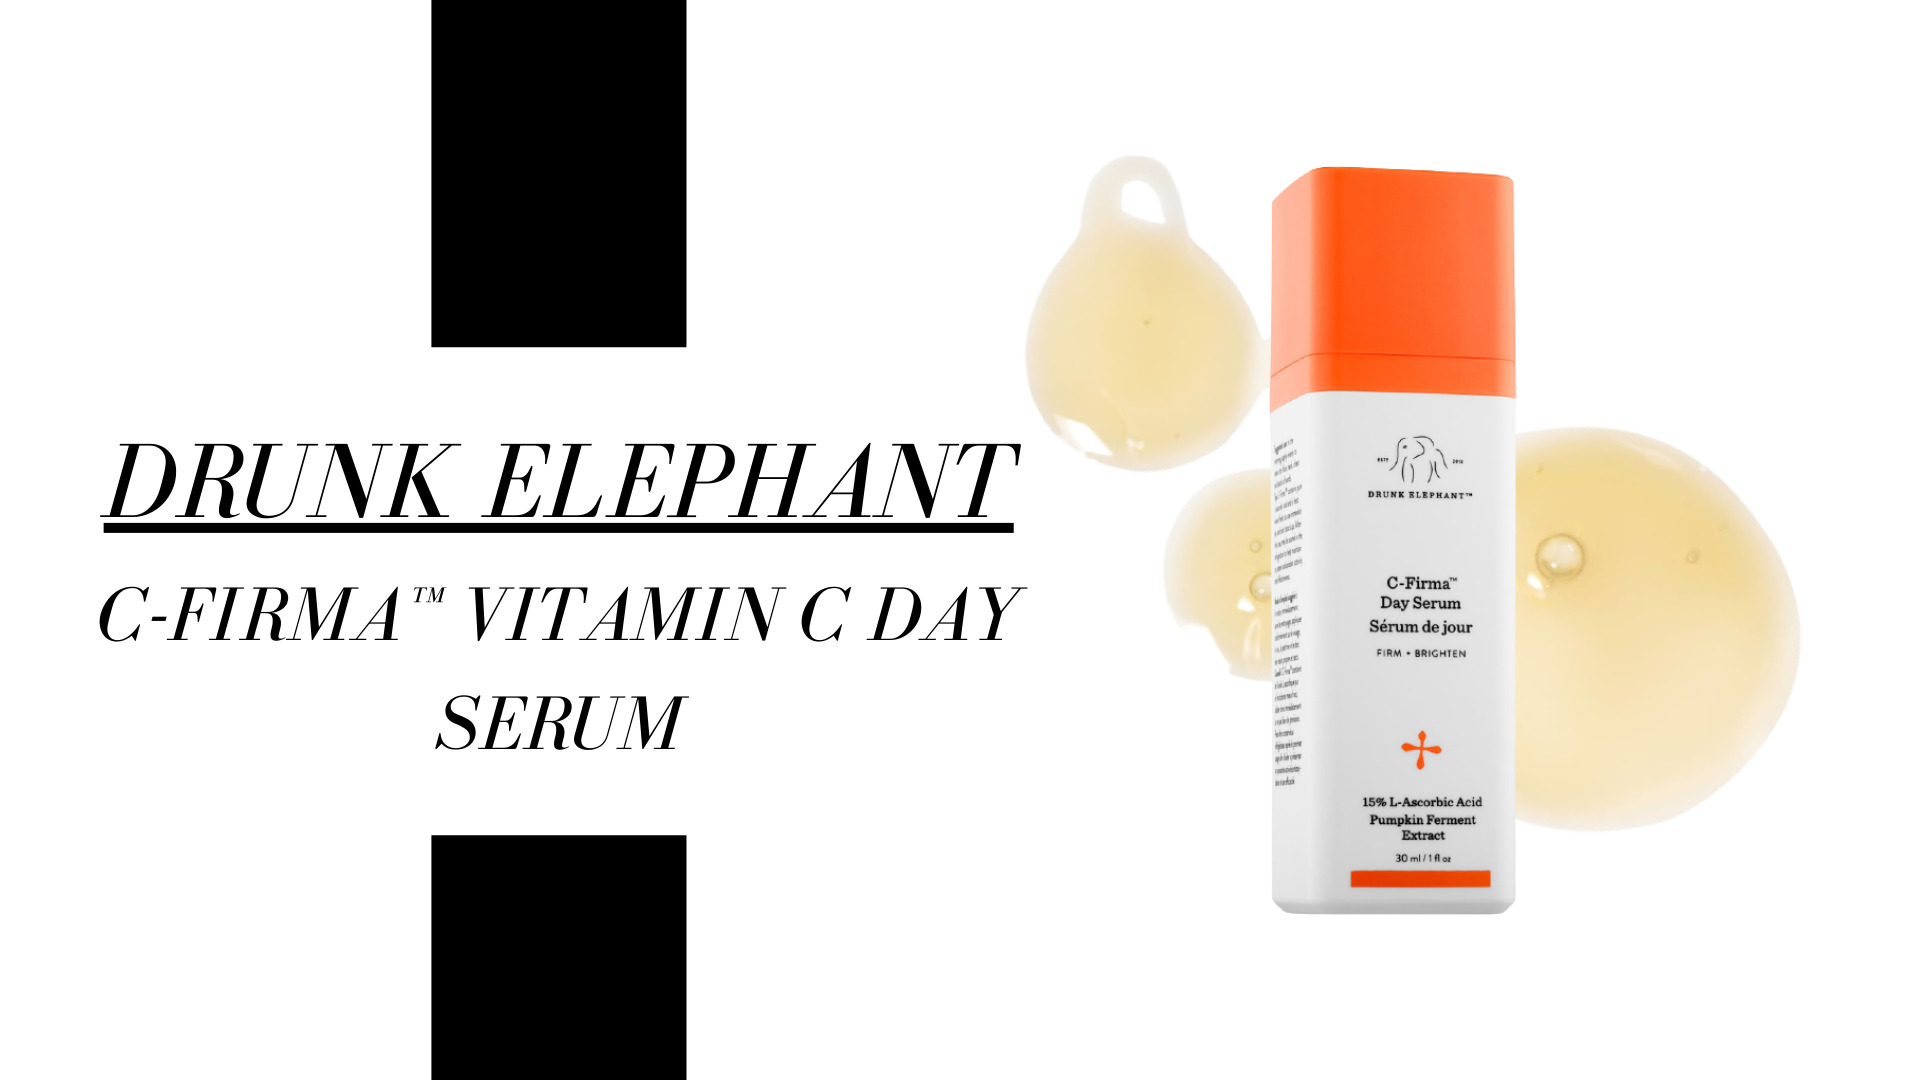 Besides having a deficit in hydration, another common deficit is Vitamin C. For that reason, we thought this serum could be the solution! It is a potent vitamin C day serum packed with antioxidants, nutrients, and fruit enzymes to visibly firm, brighten and improve signs of photoaging.